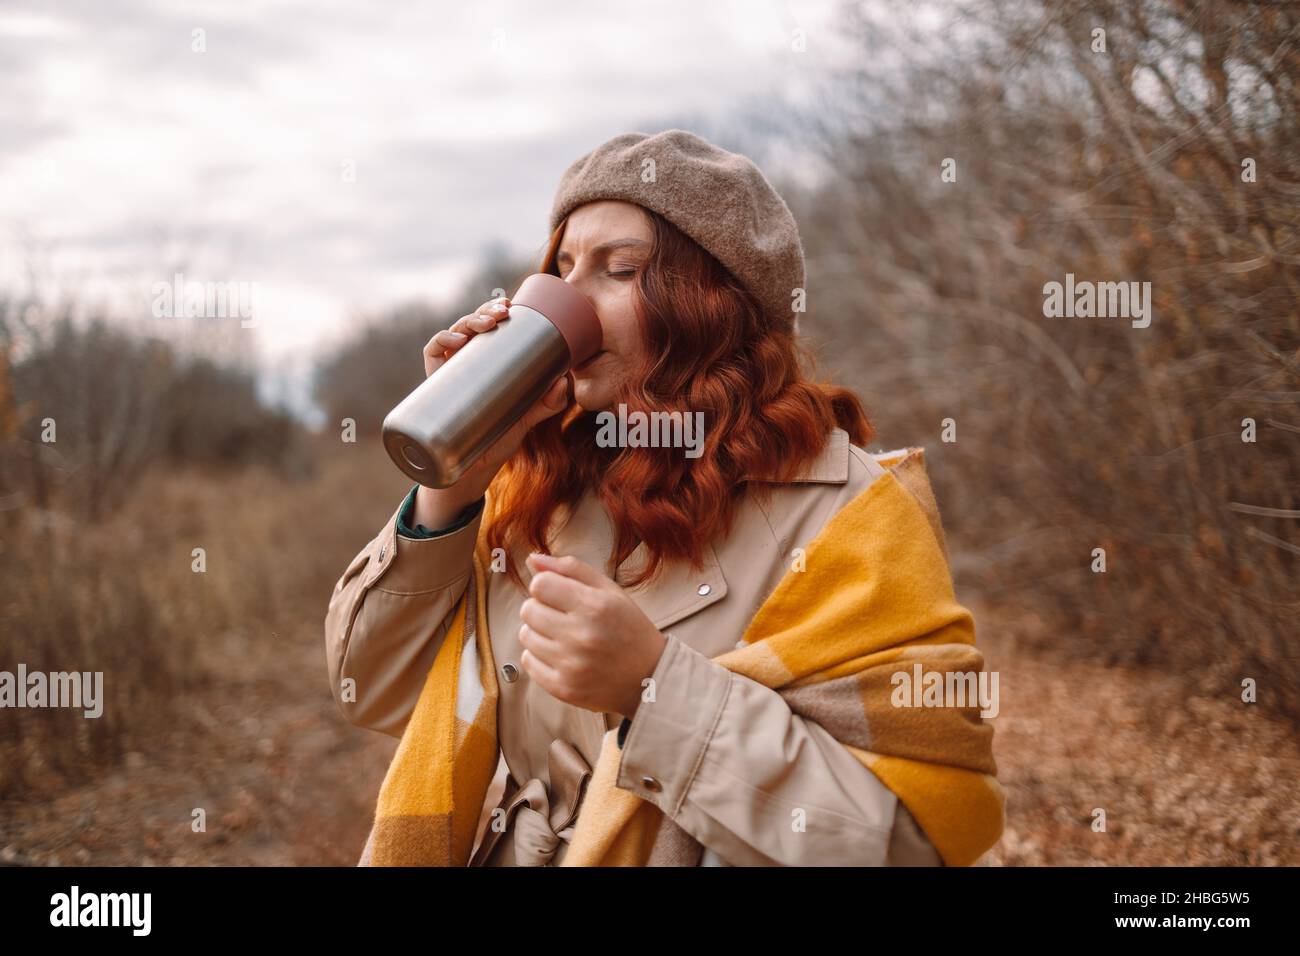 Thermos with hot drink. Happy curly hair woman drinking travel mug or steel thermo bottle. Zero waste eco concept Stock Photo